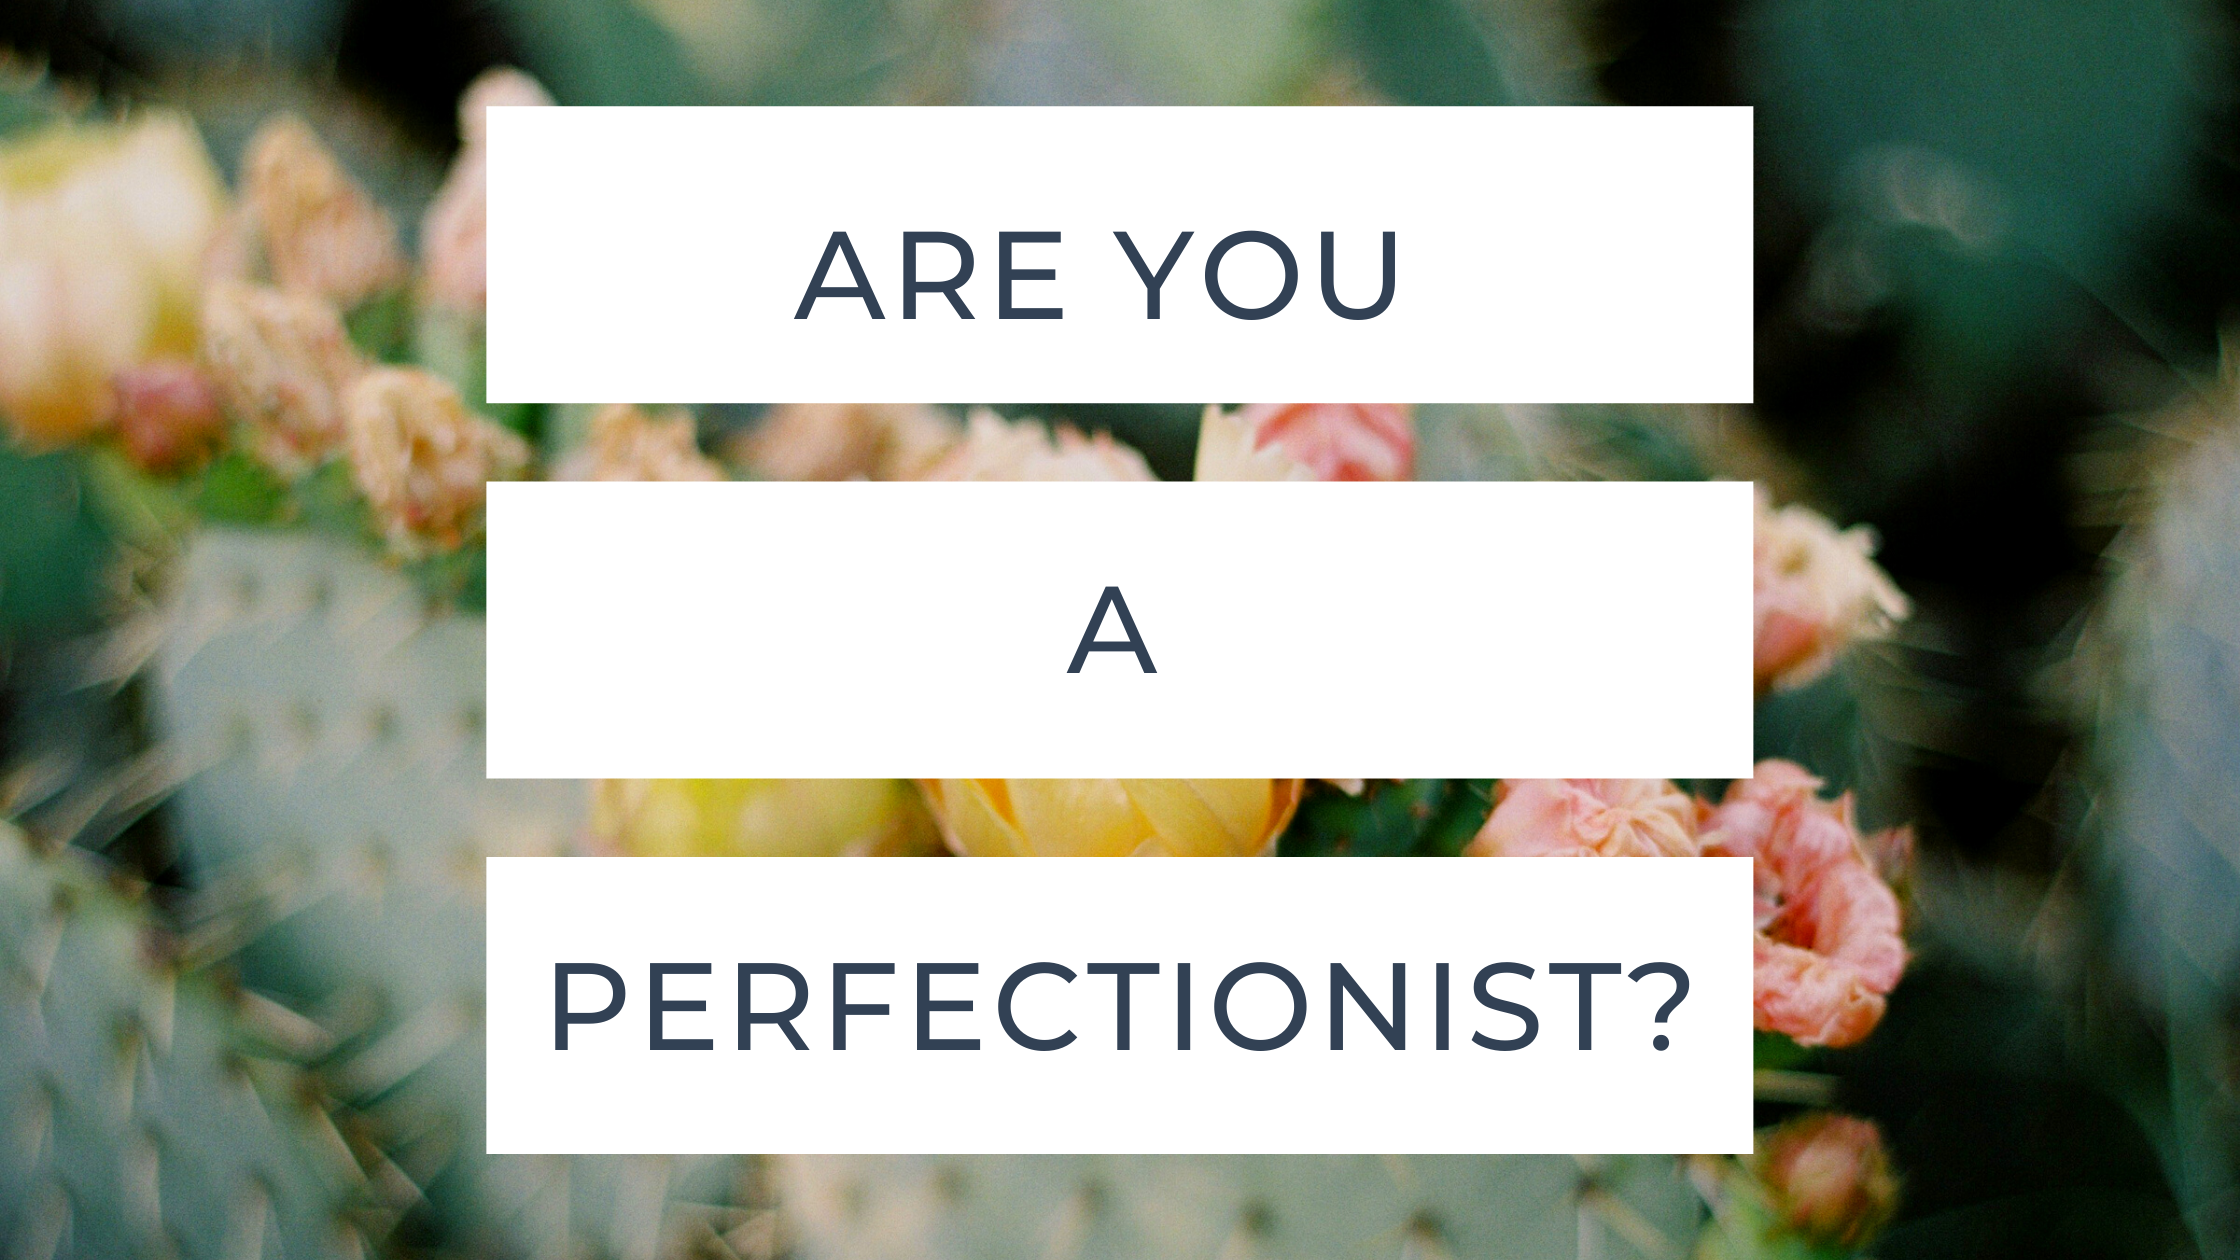 Do you struggle with perfectionism?